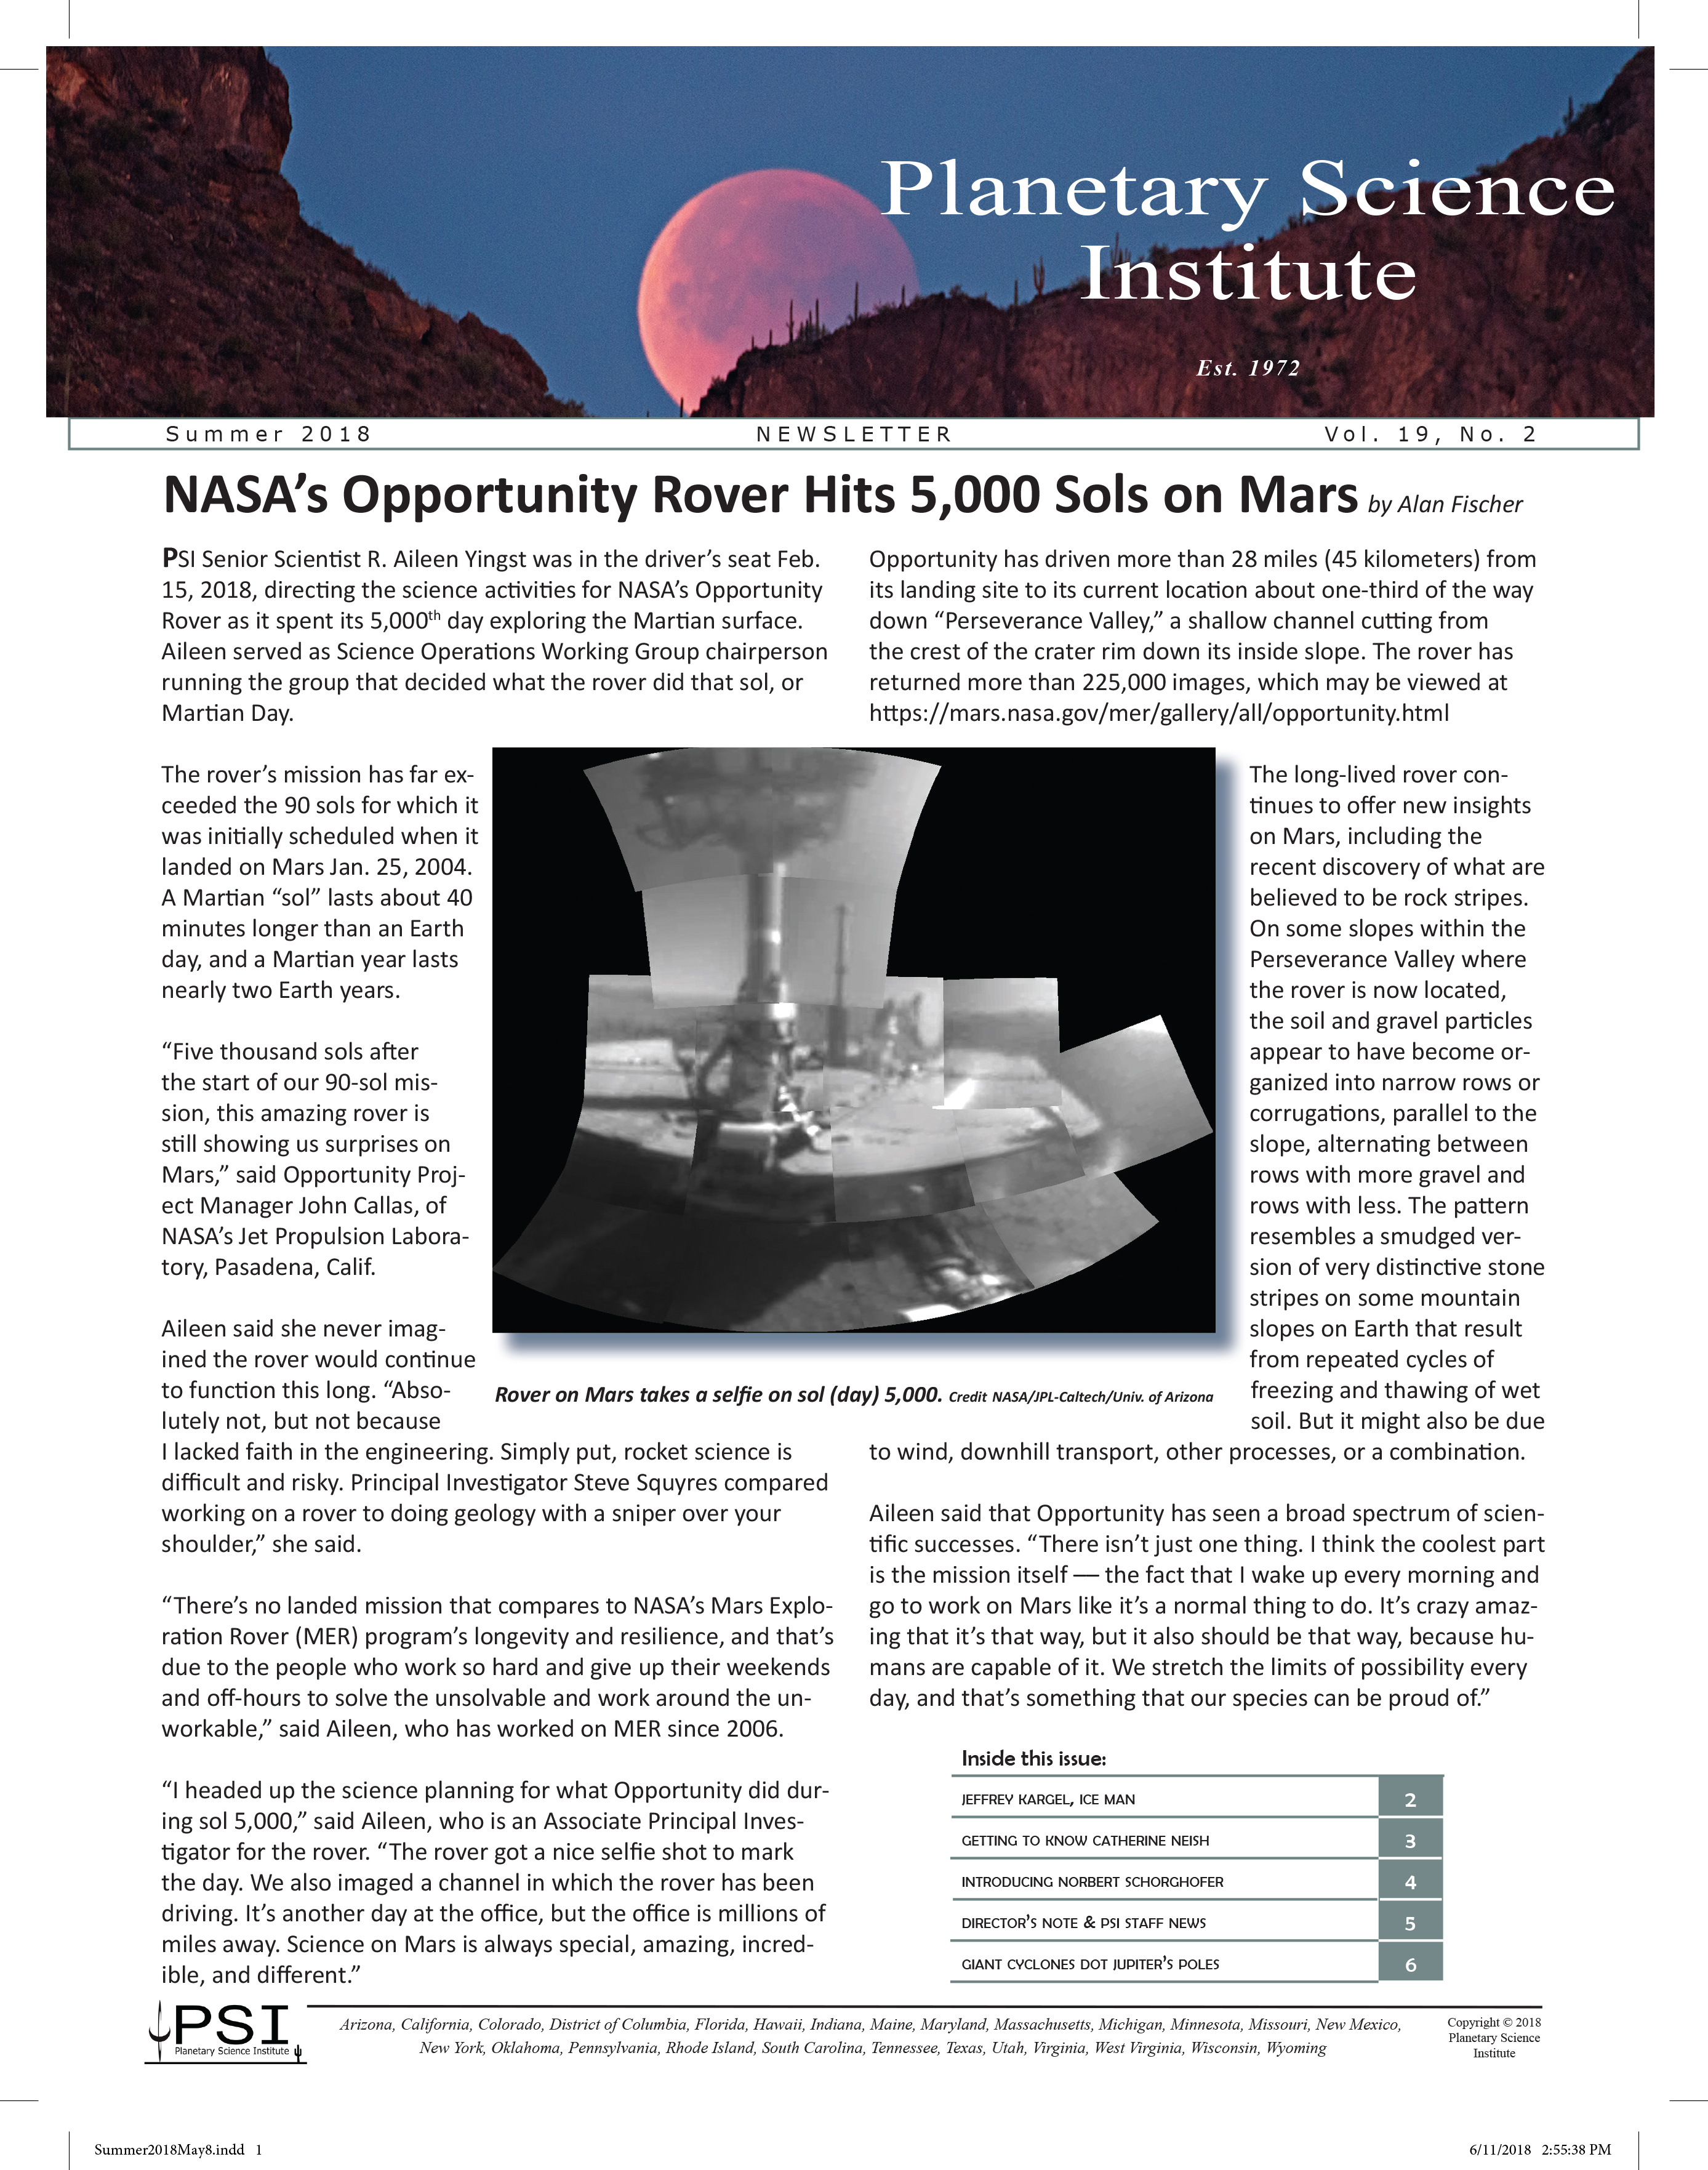 psi newsletter planetary science institute